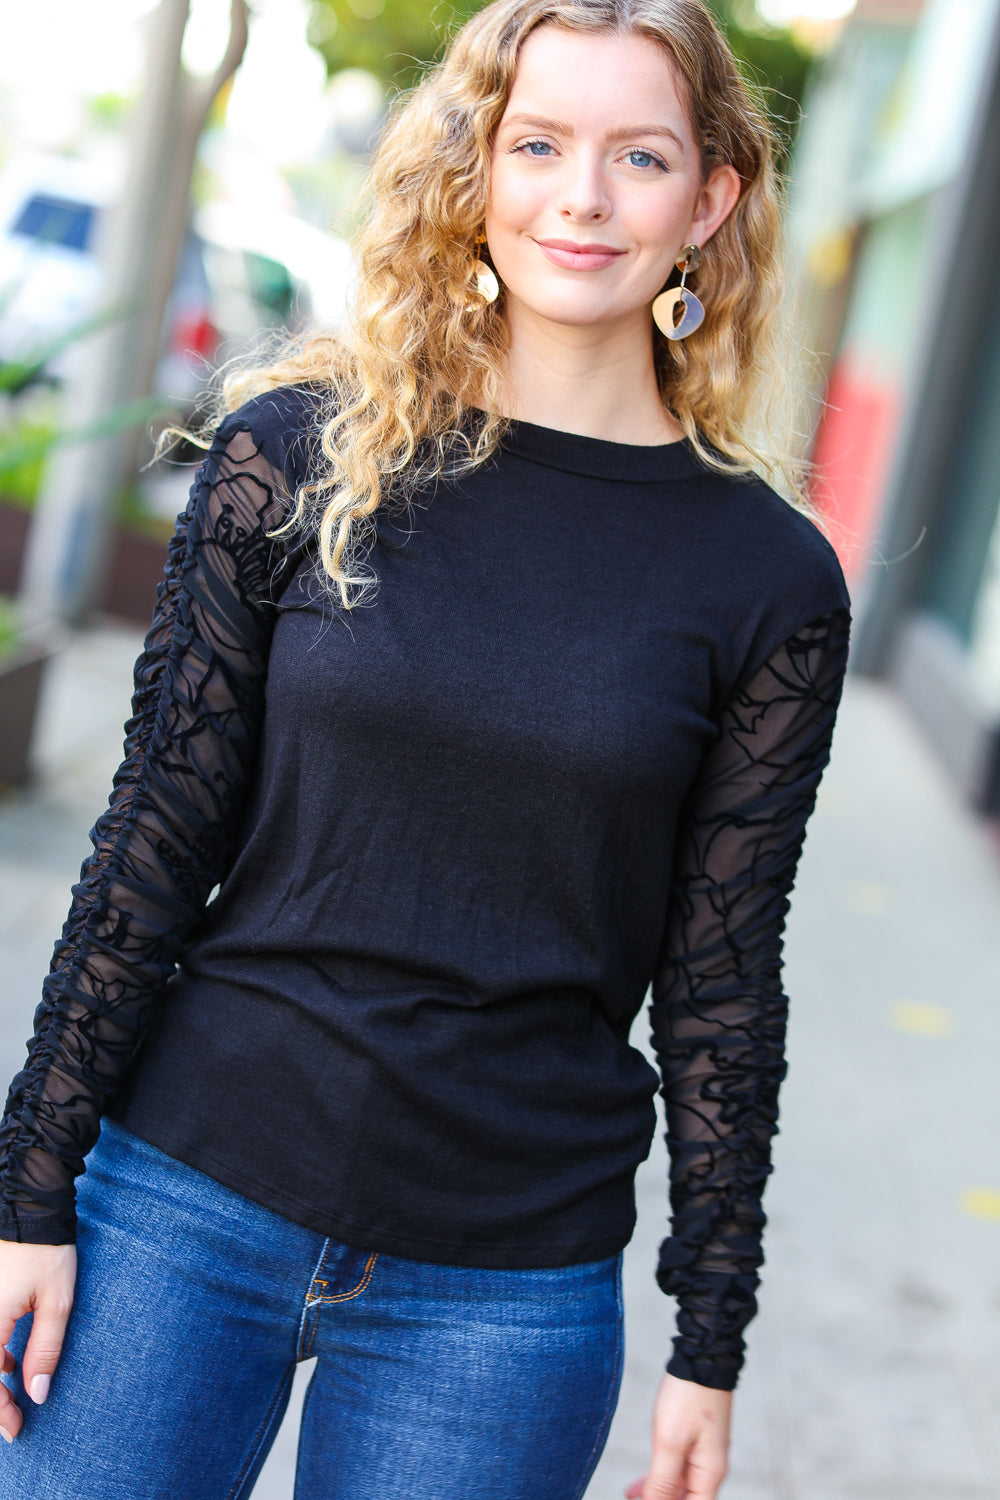 Can't Help But Love Black Shirred Velvet Mesh Blouse-Inspired by Justeen-Women's Clothing Boutique in Chicago, Illinois